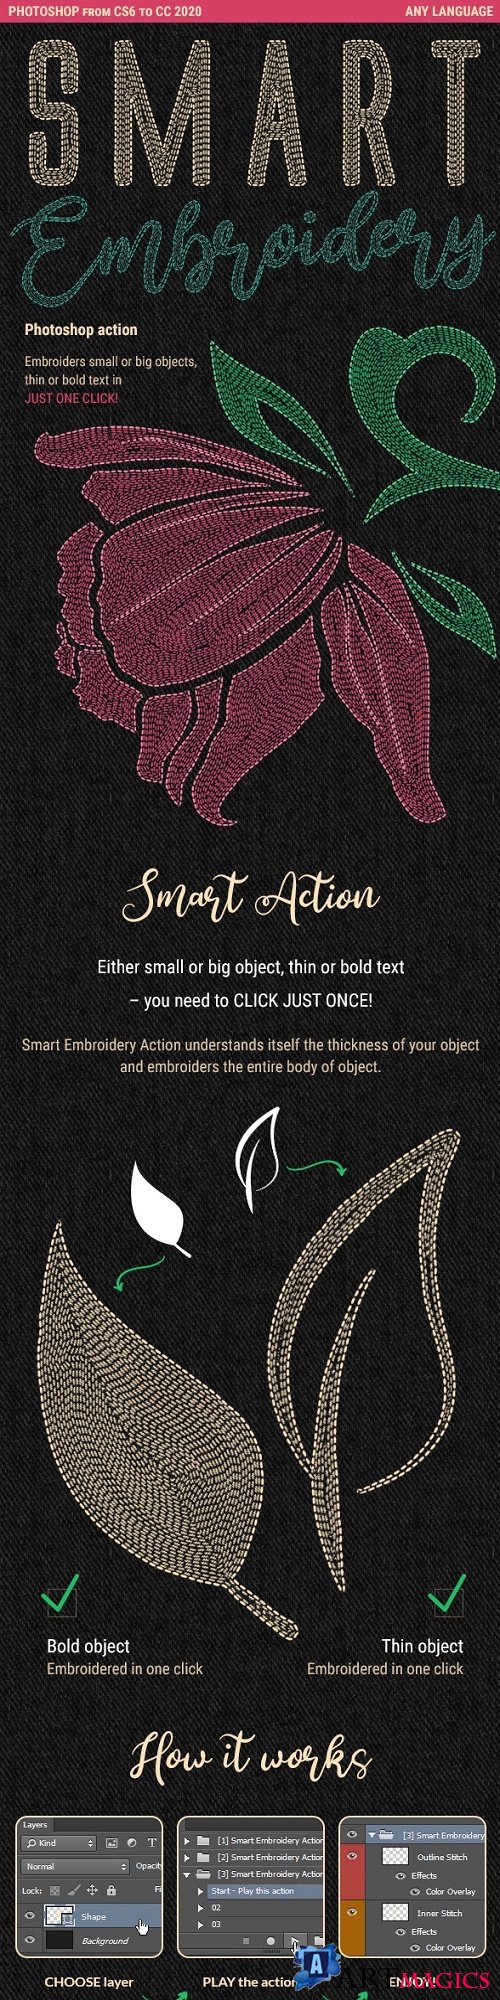 Smart Embroidery - Photoshop Action 25827222